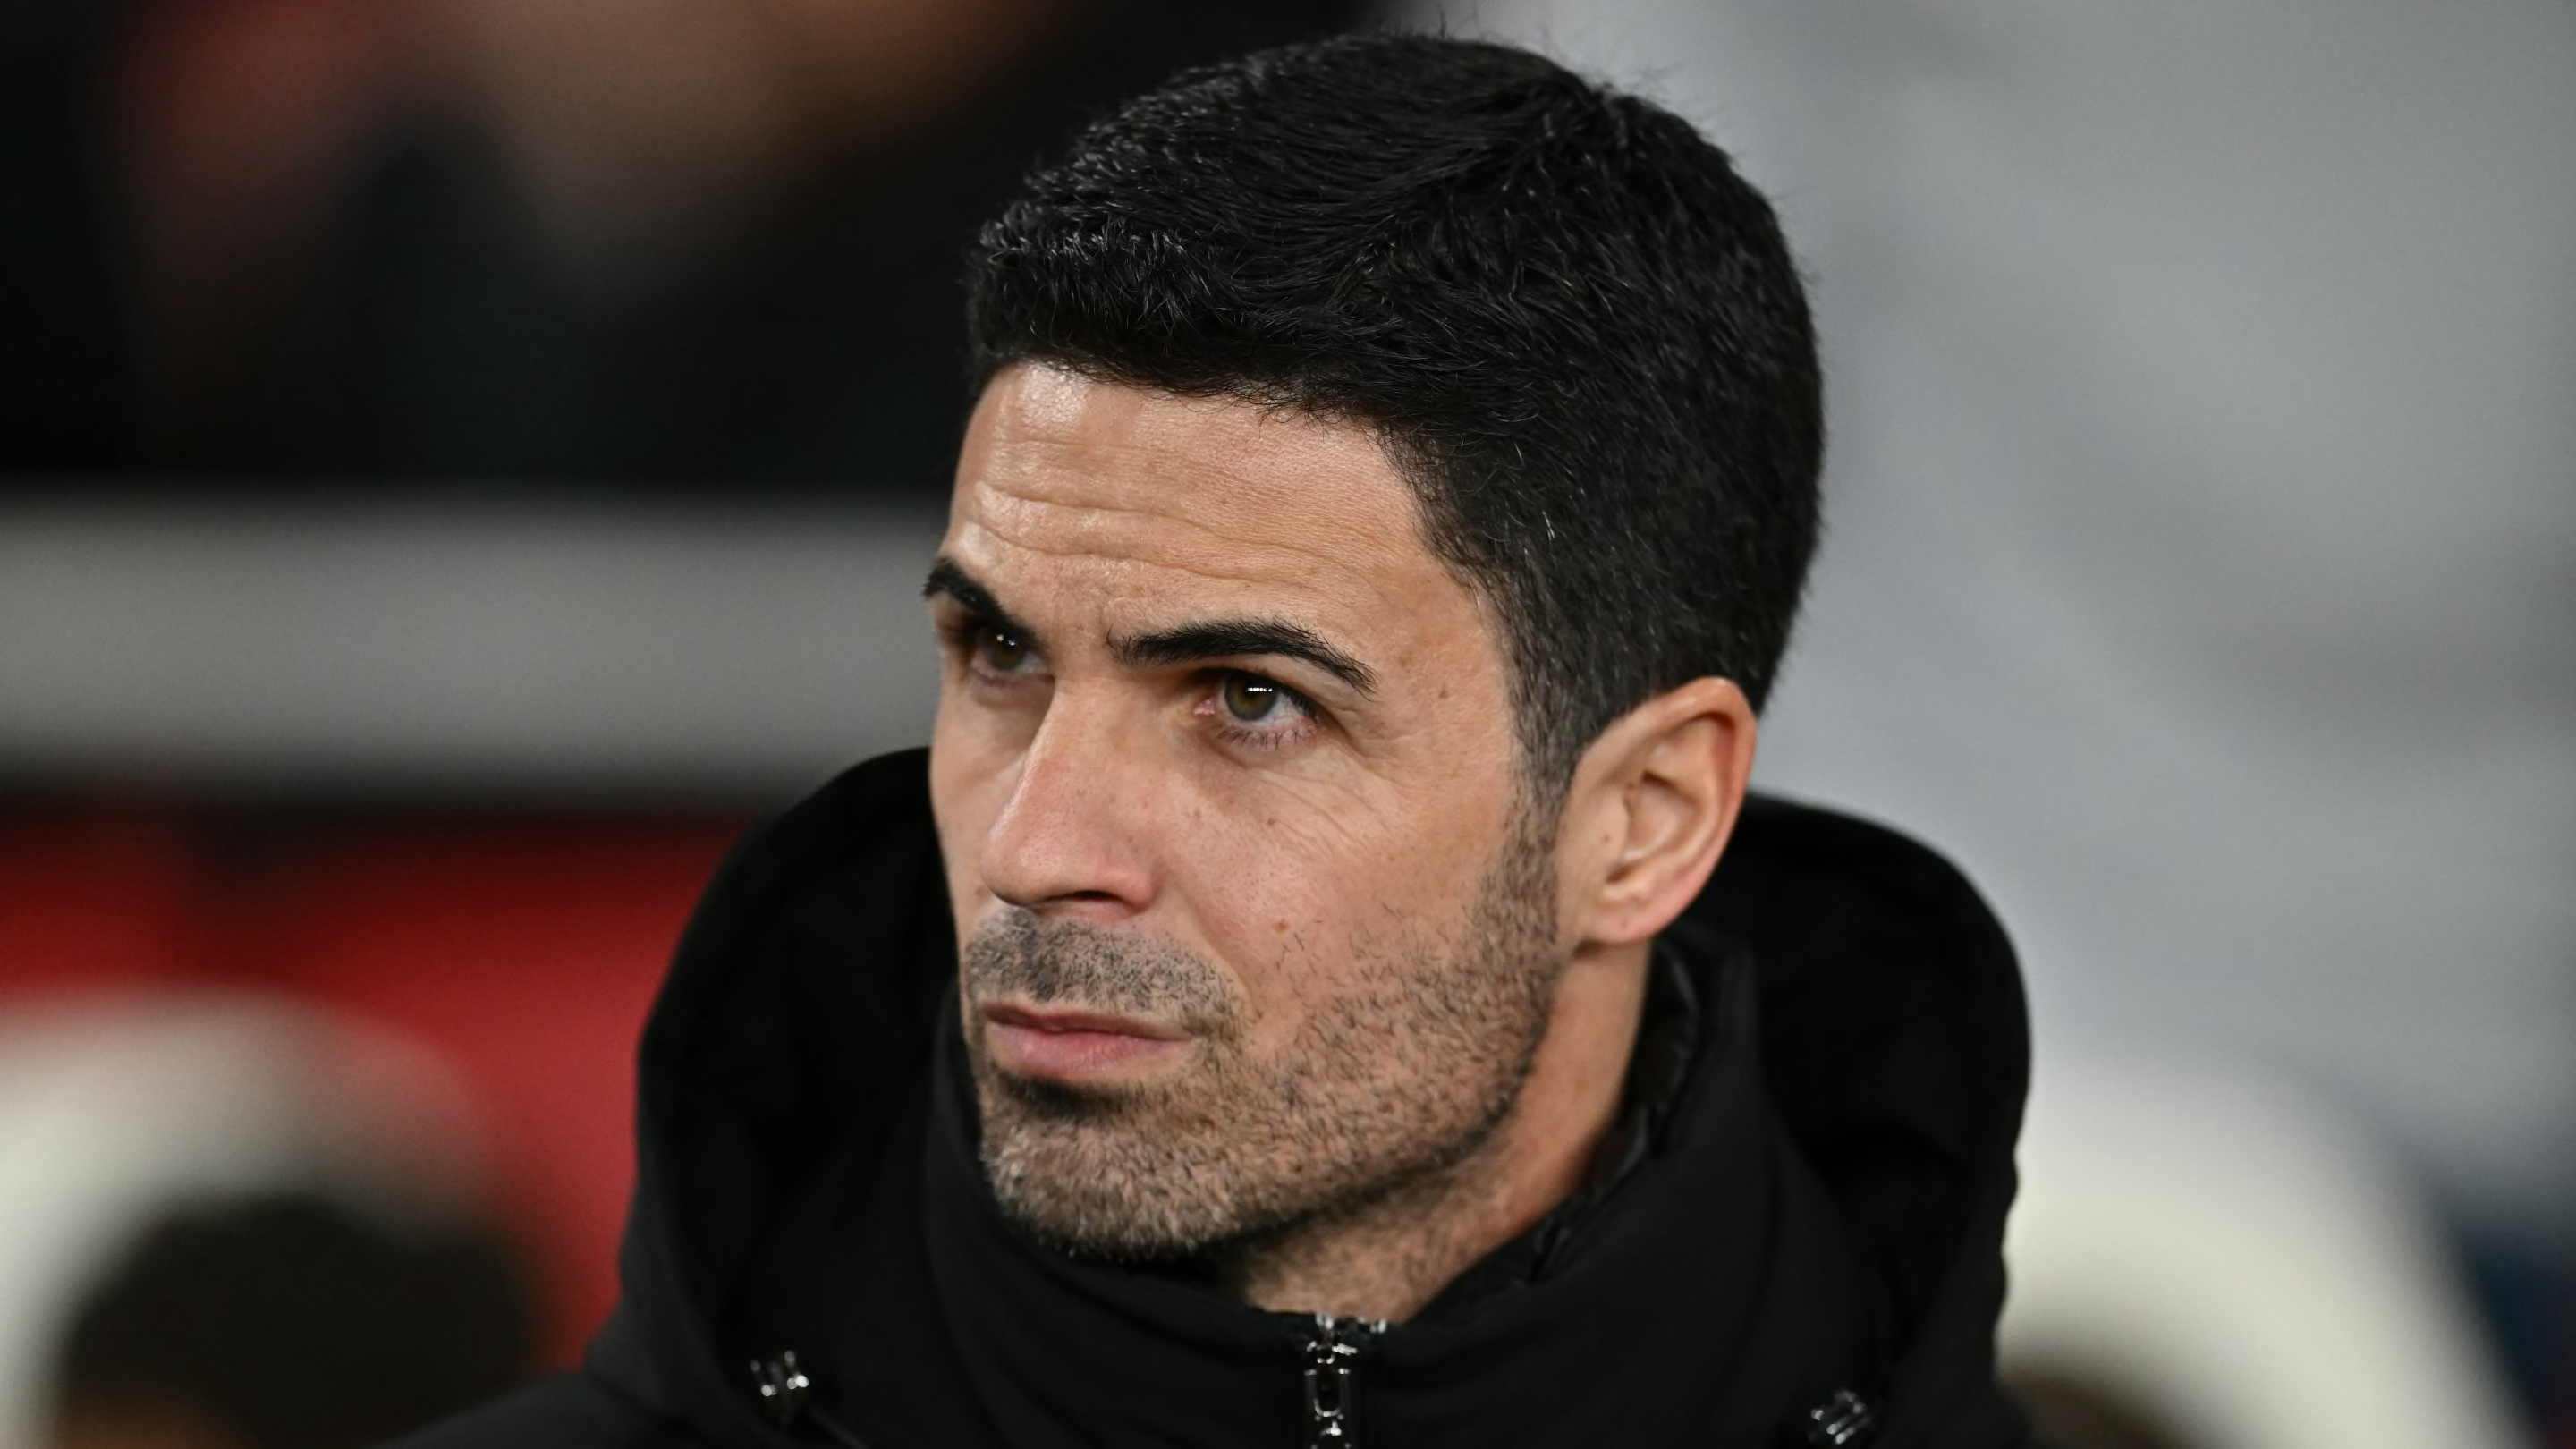 Mikel Arteta demands more from Arsenal players in fight for Premier League title